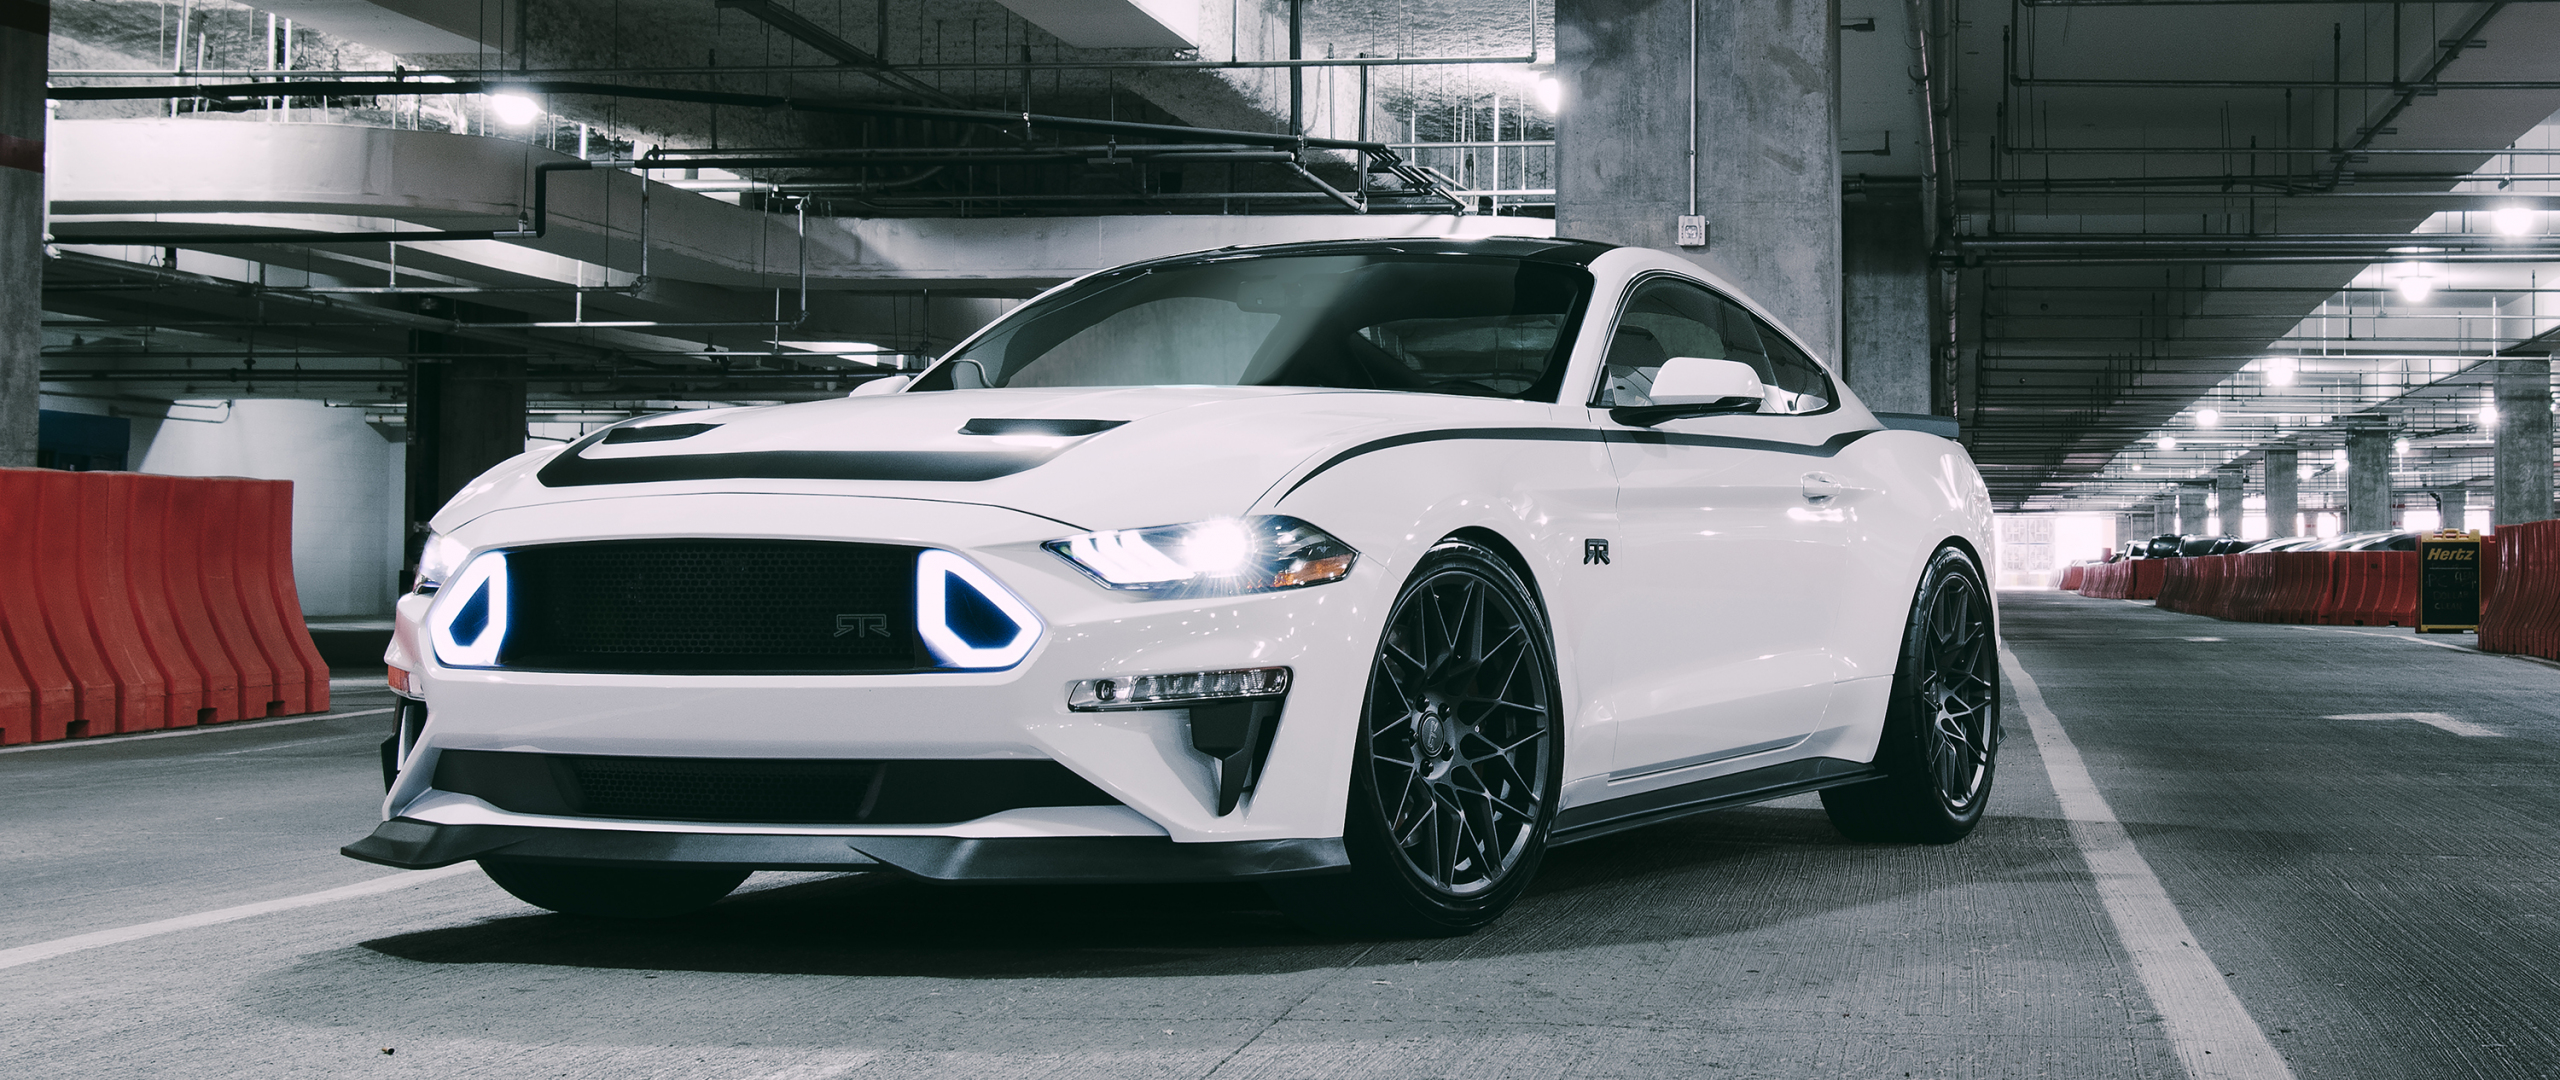 Download 2560x1080 Wallpaper White Ford Mustang Muscle Car Dual Wide Widescreen 2560x1080 Hd Image Background 800